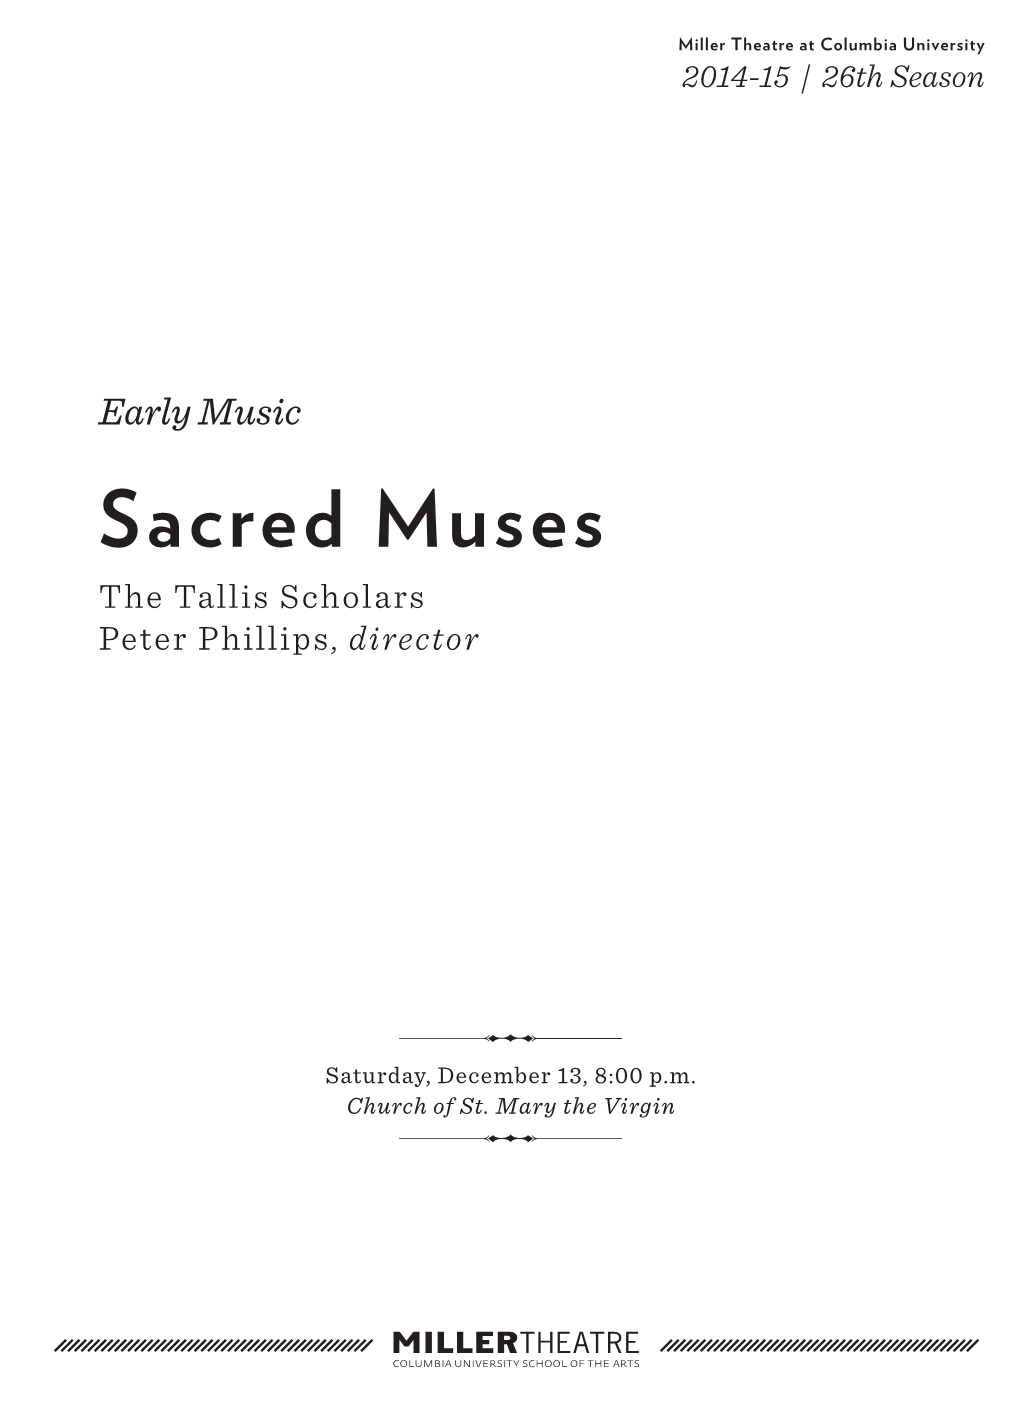 Sacred Muses the Tallis Scholars Peter Phillips, Director